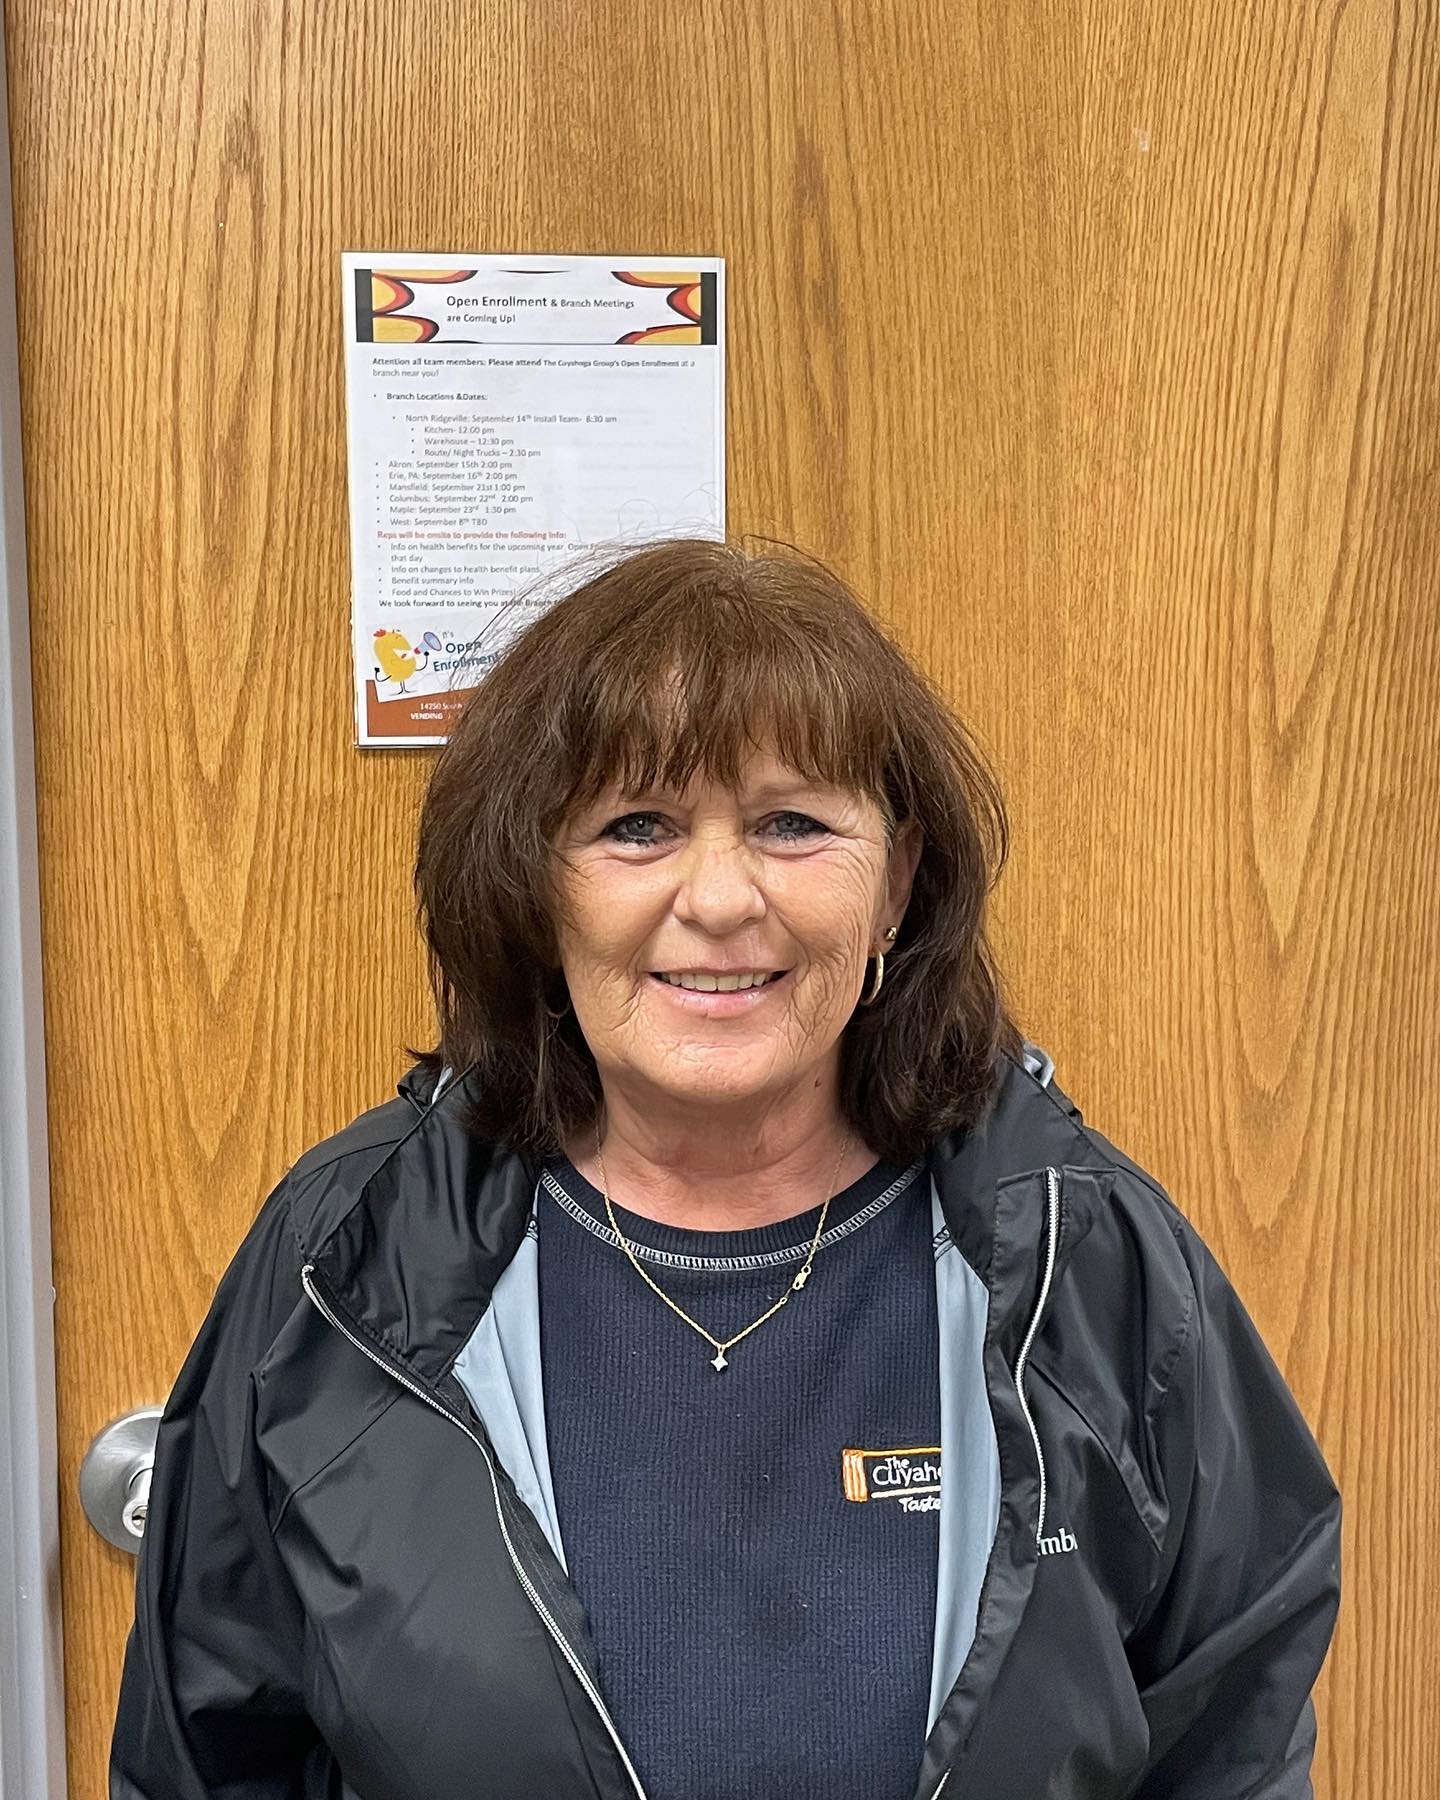 Congratulations to Cuyahoga Group Team Member Opal Bare who has been selected as one of our December Employee Spotlights! 
Opal will celebrate 20 years in her current role as Route Driver for Next Generation on December 4th! 
Thank your hard work day in and day out and your commitment as a great employee these past 20 years!  #Thankful #Employeespotlight #20years 
Learn more about Opal in this month’s employee spotlight. Link in bio.